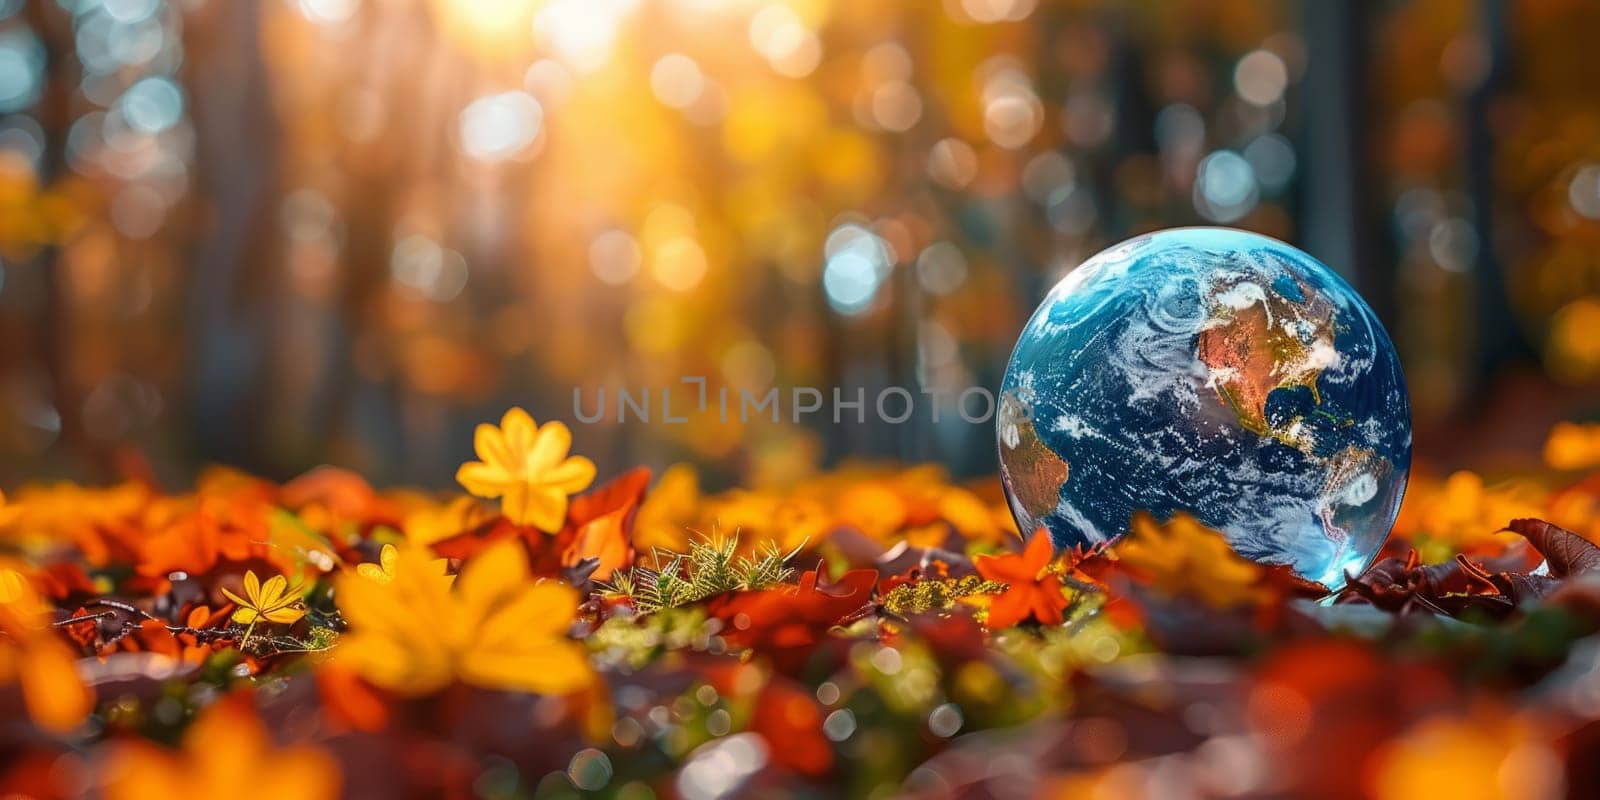 Autumn nature scenery with globe and fallen leaves. Environmental concept of changing seasons and planet Earth preservation. by ailike